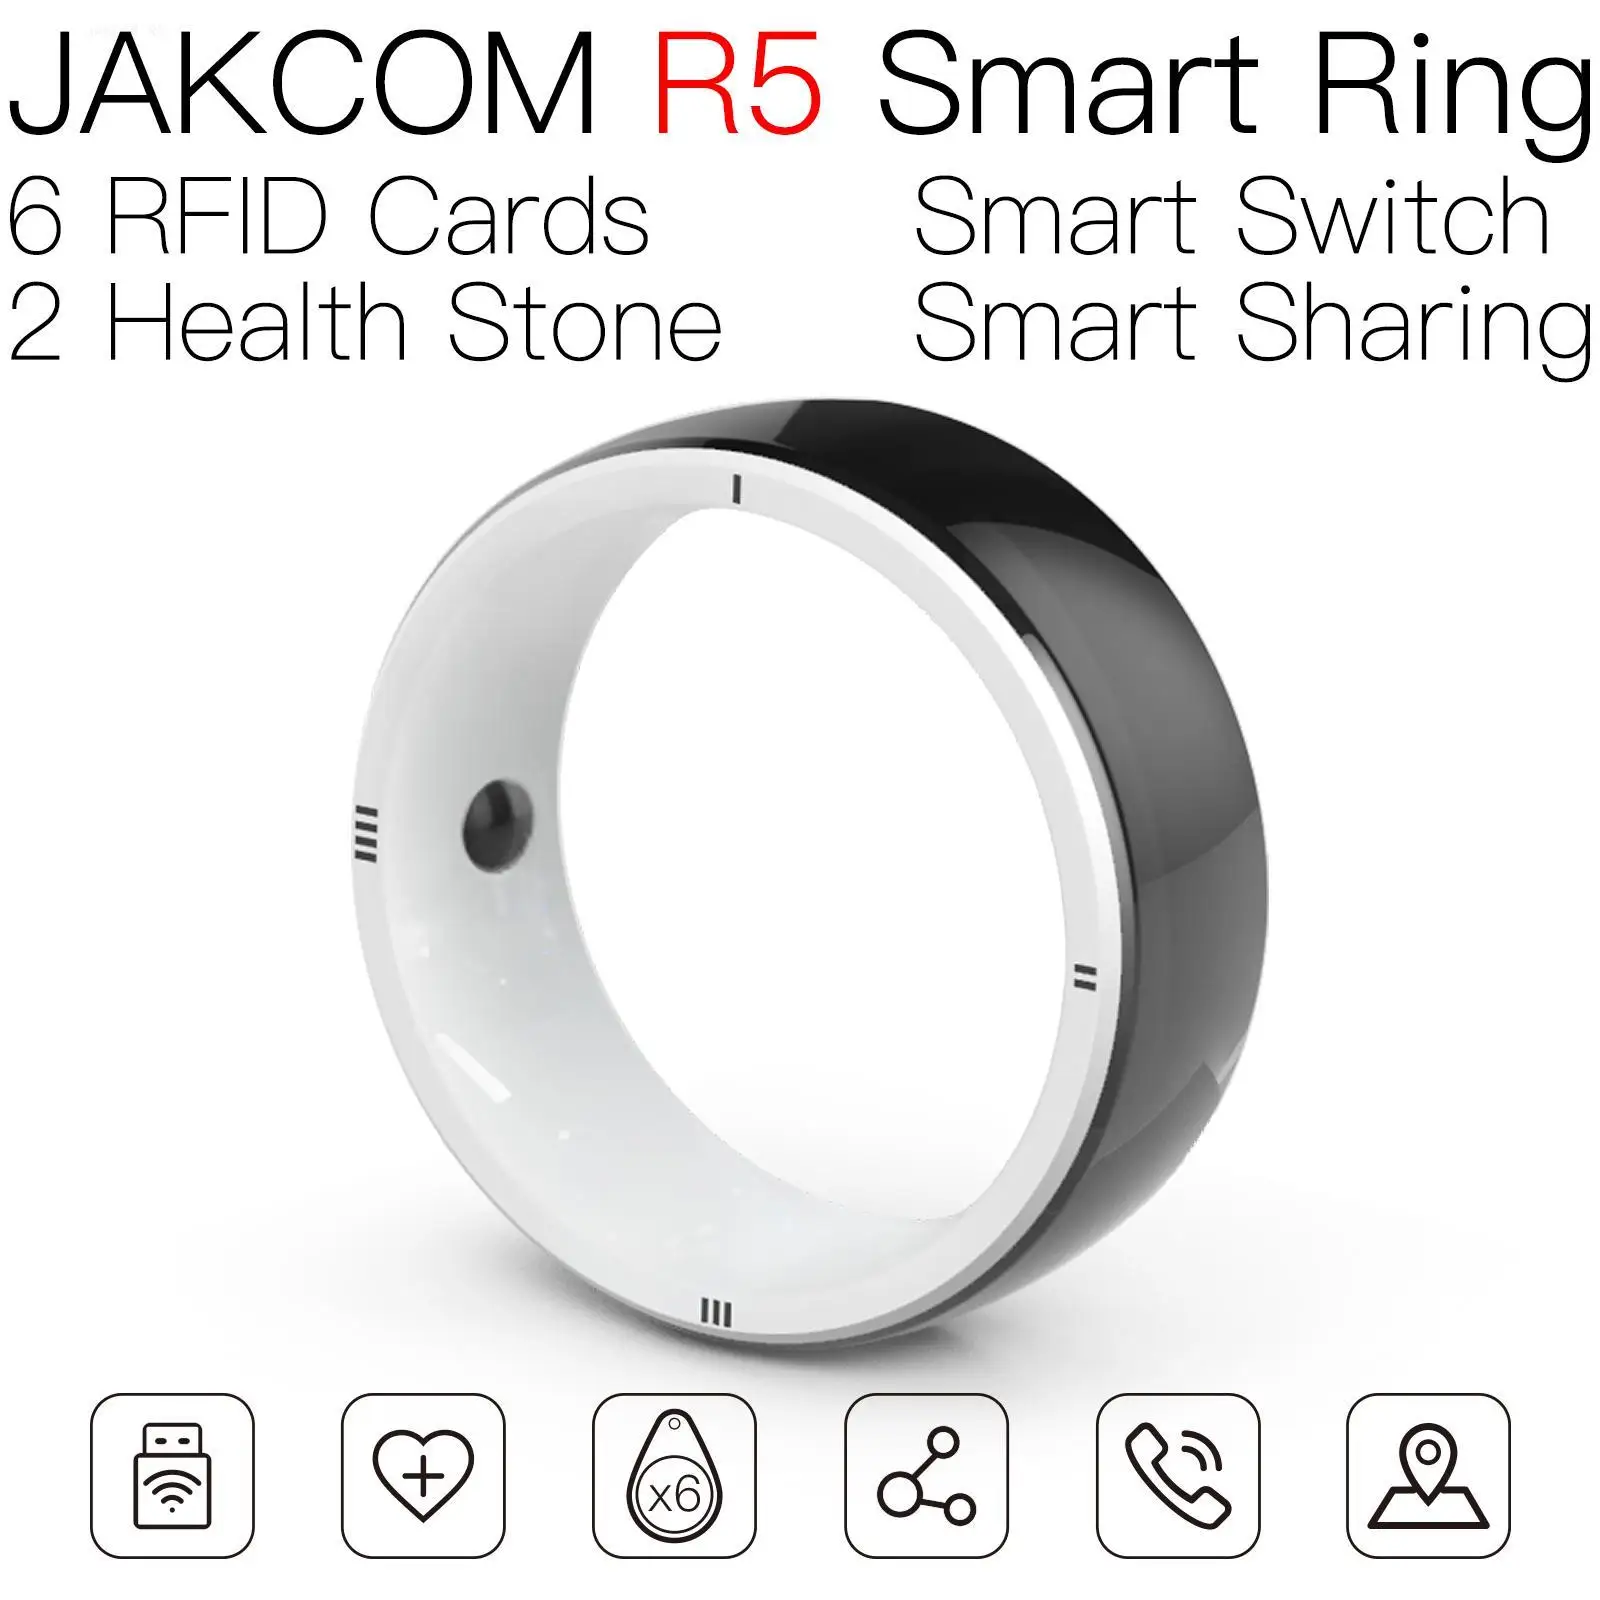 

JAKCOM R5 Smart Ring Match to bague support rfid pigeon sticker for goat whistle key finder red write nfc uhf race tag pay 1k